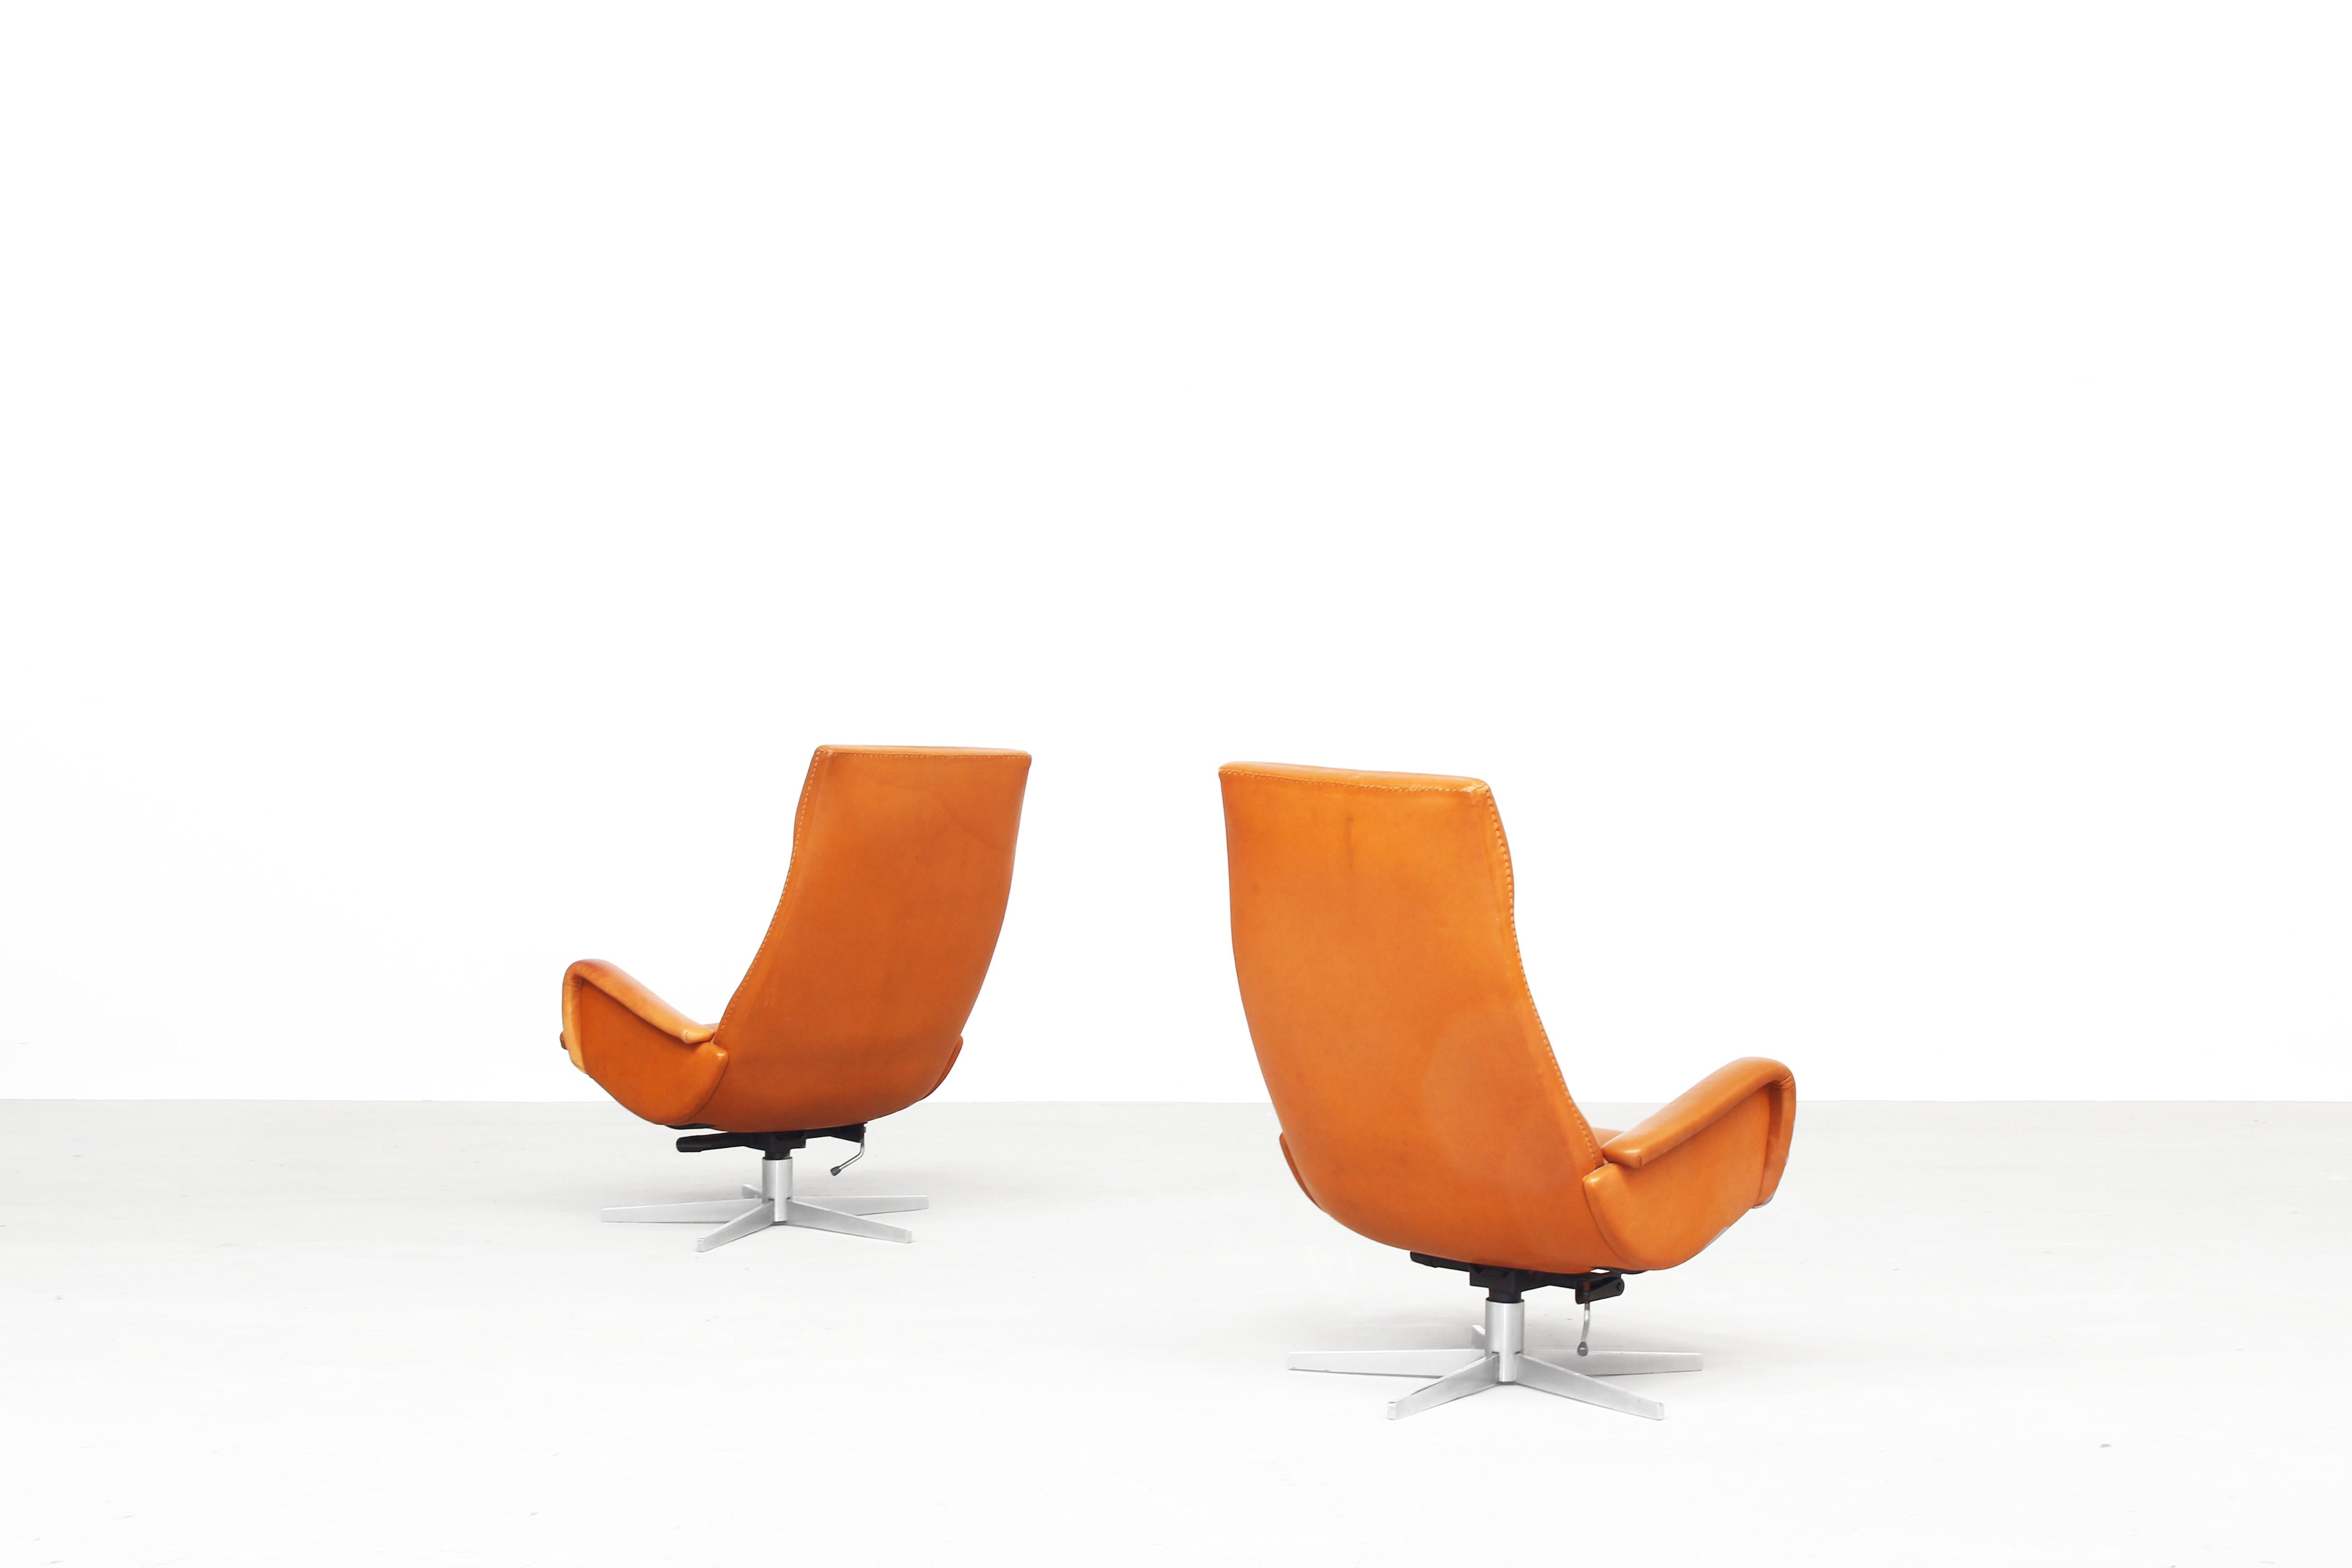 Swiss Pair of Lounge Chairs by De Sede Mod. Ds 51, Original 1970s in Cognac Leather